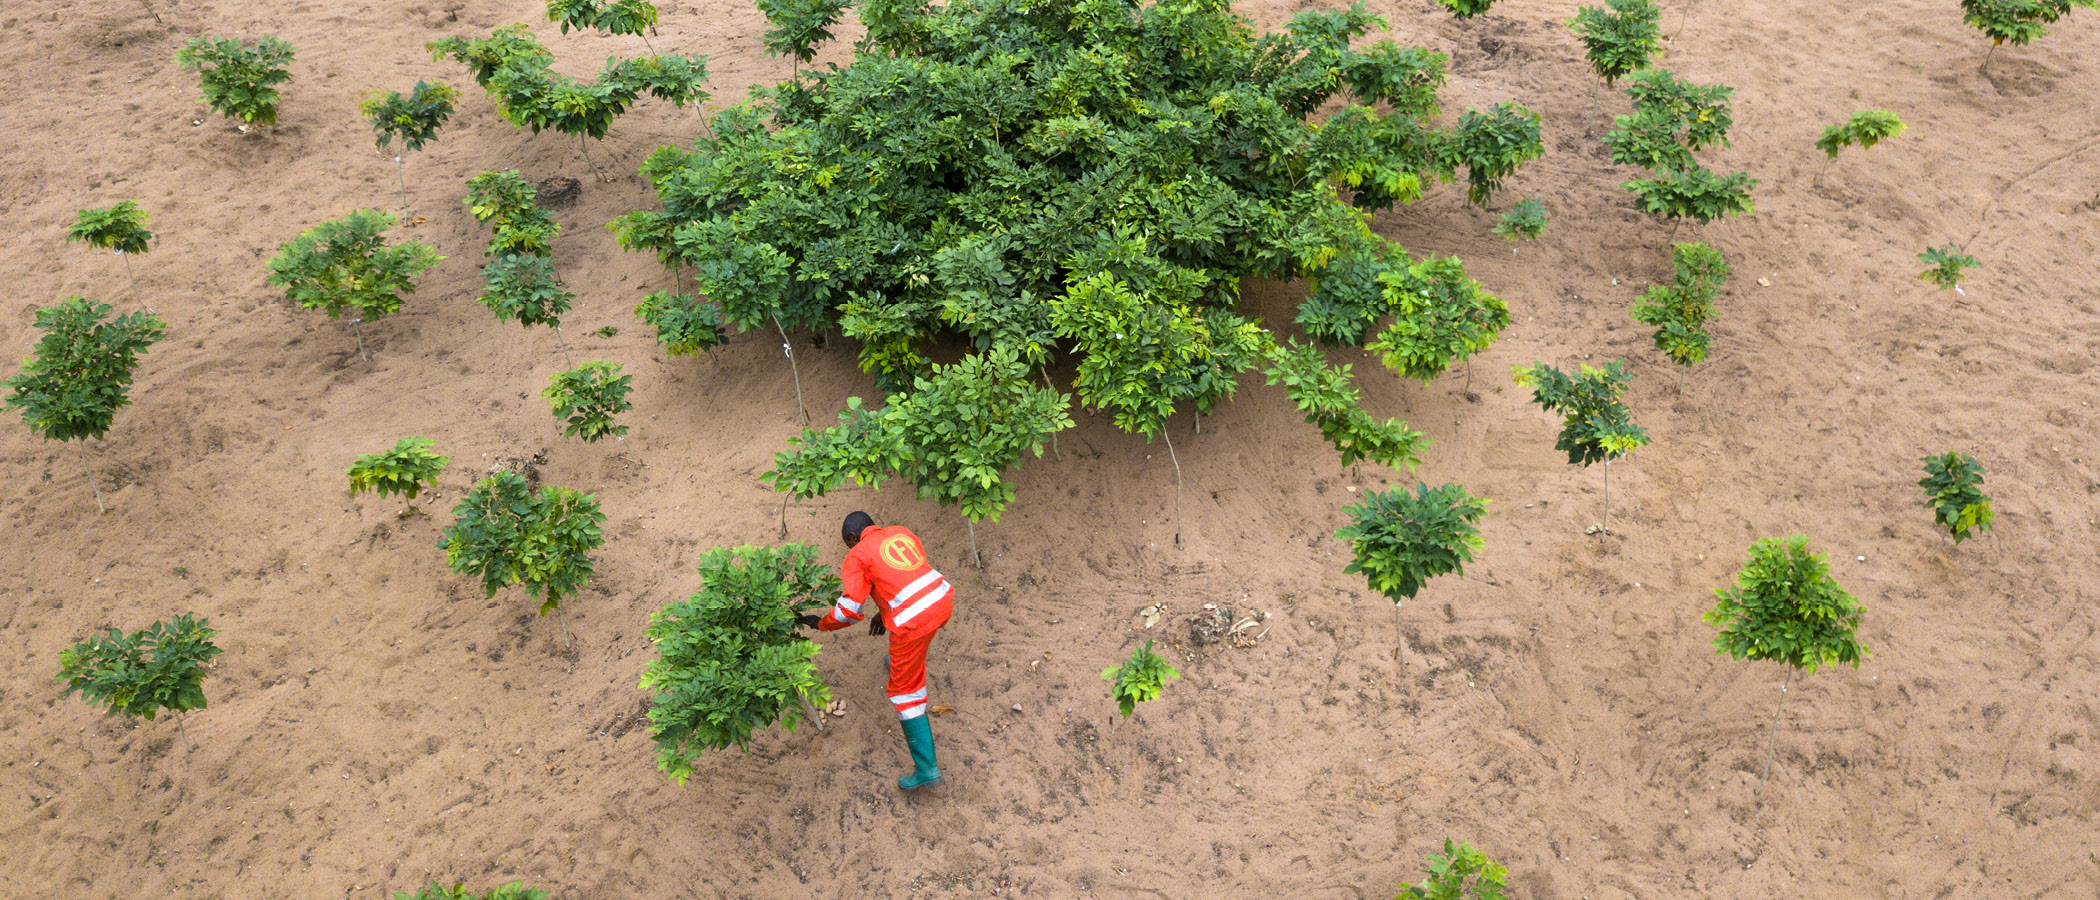 Worker tending young trees